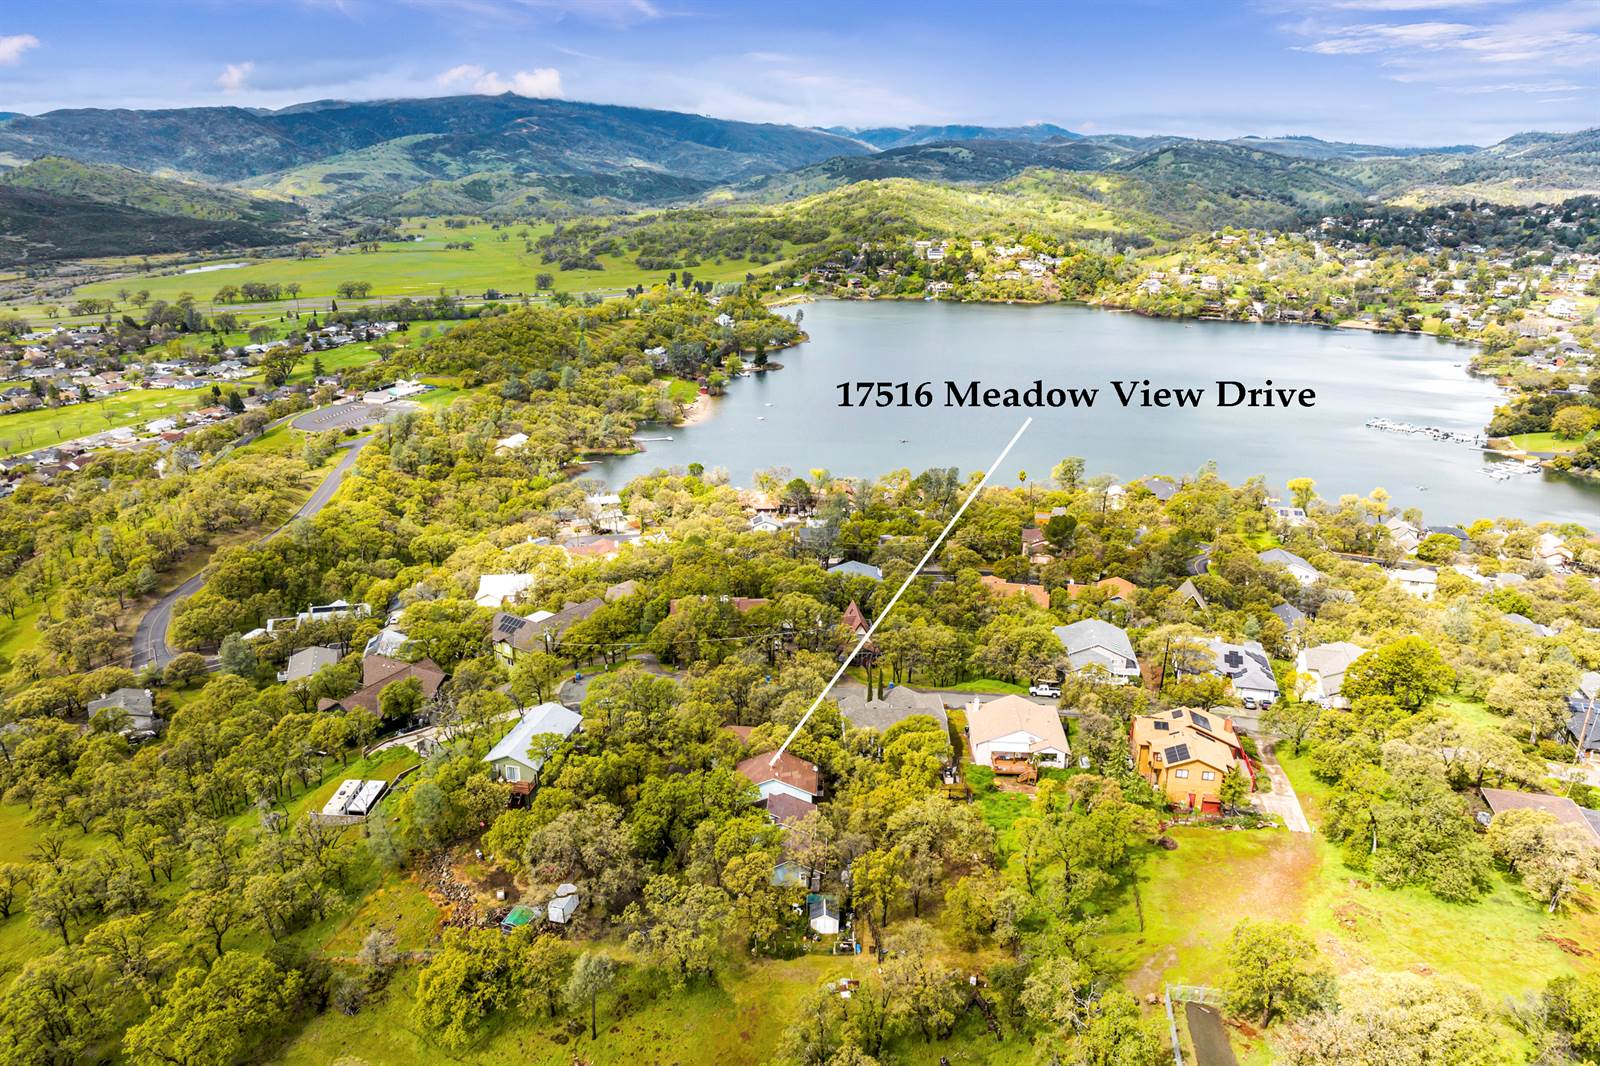 17516 Meadow View Drive, Hidden Valley Lake, CA 95467